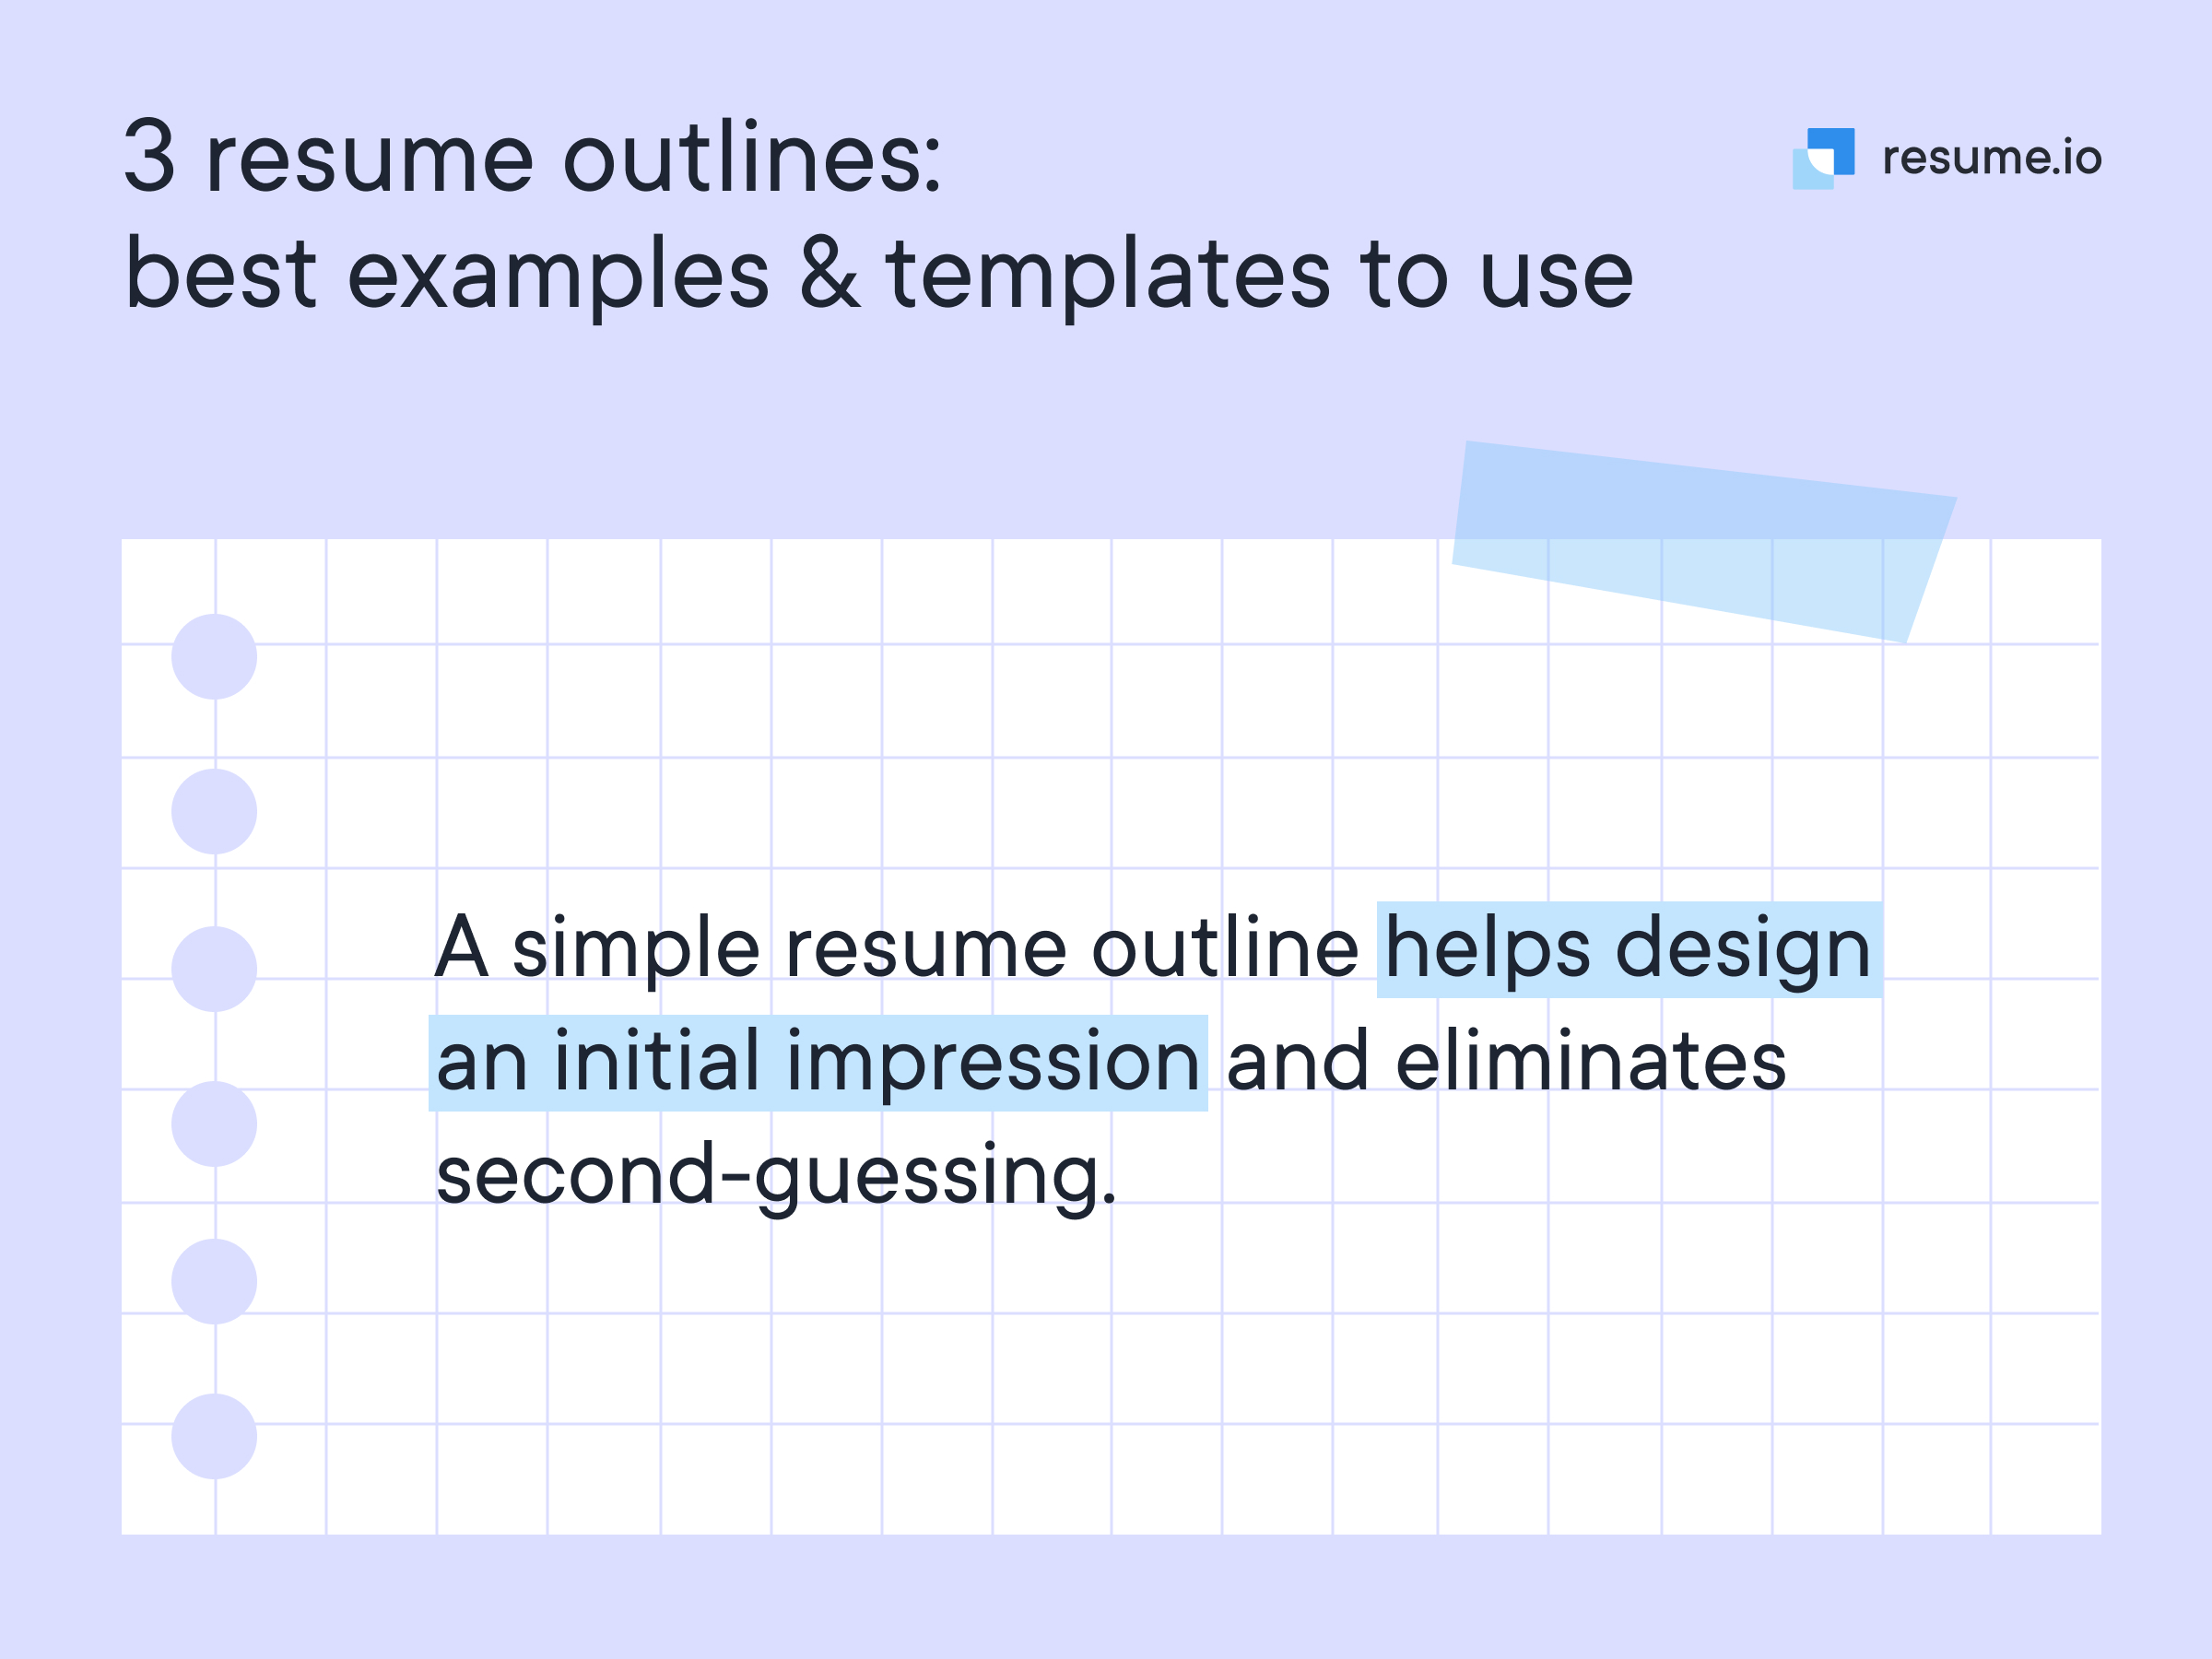 Resume outlines helps design an initial impression